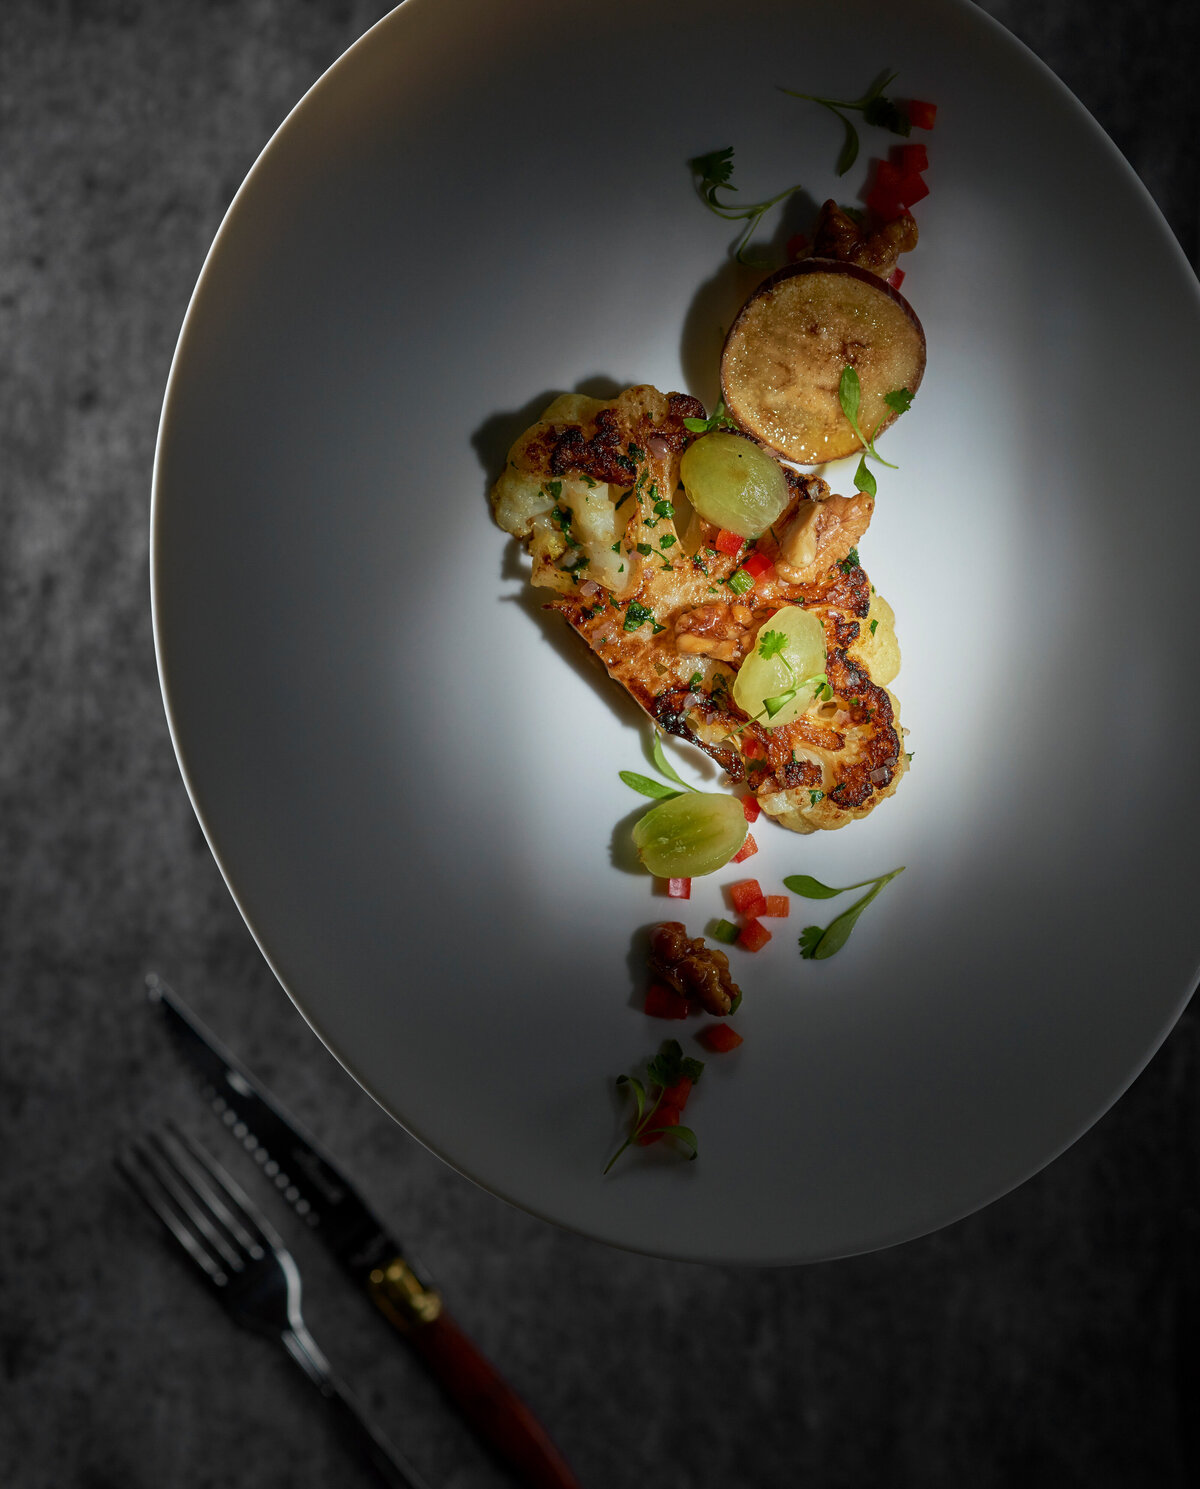 A chicken dish with a spotlight on it